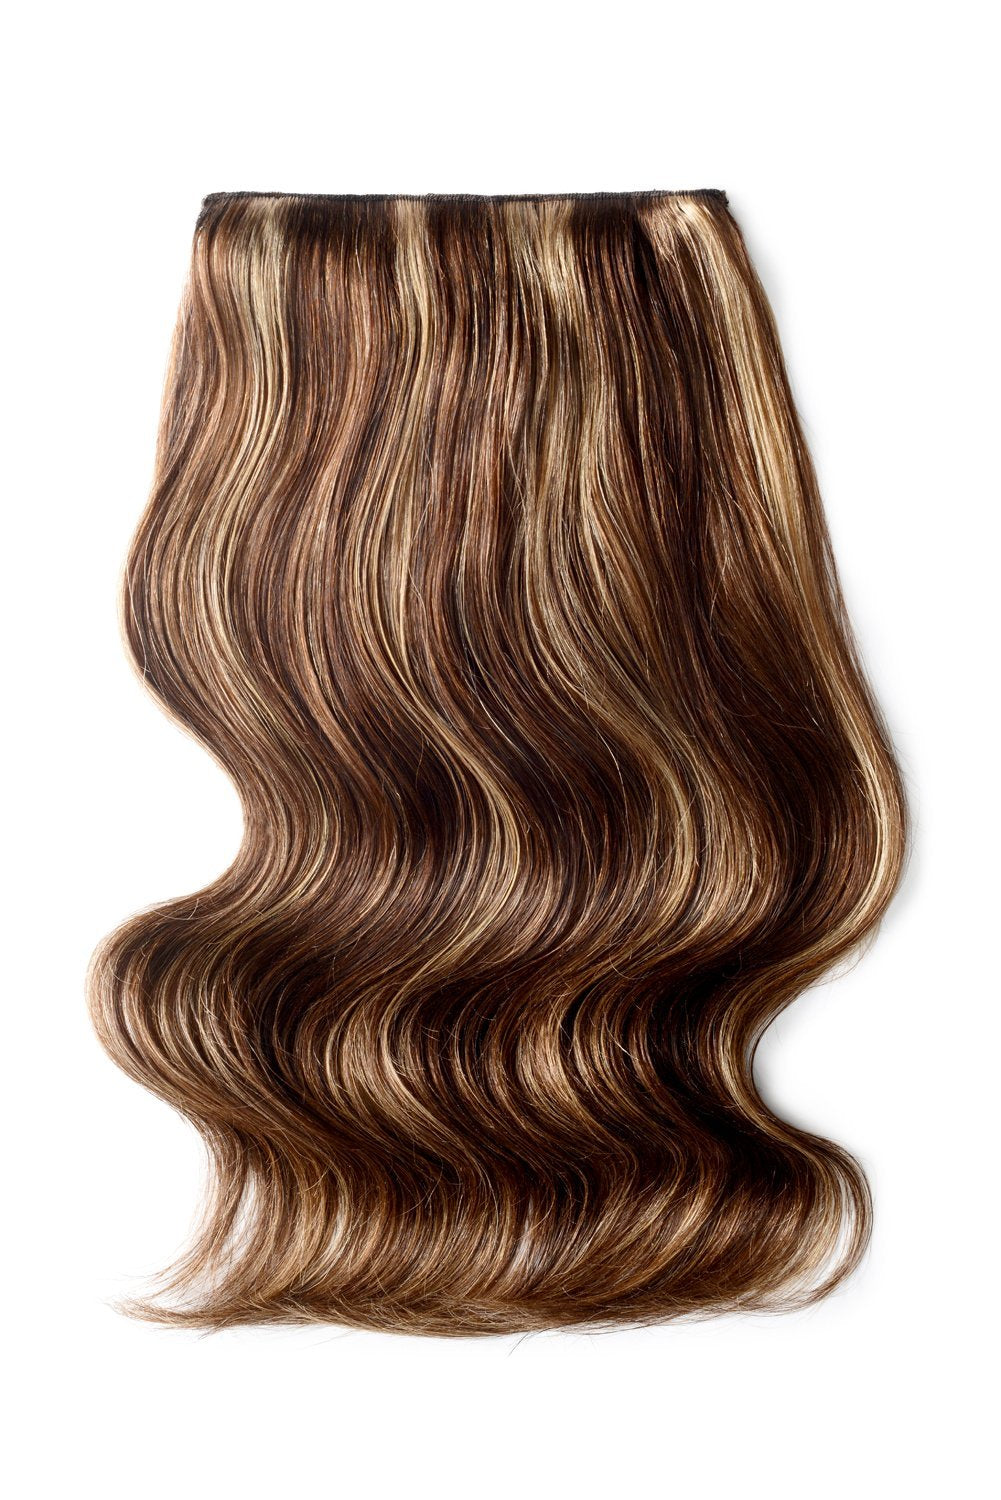 Double Wefted Full Head Remy Clip in Human Hair Extensions - Medium Brown/Strawberry Blonde Mix (#4/27)